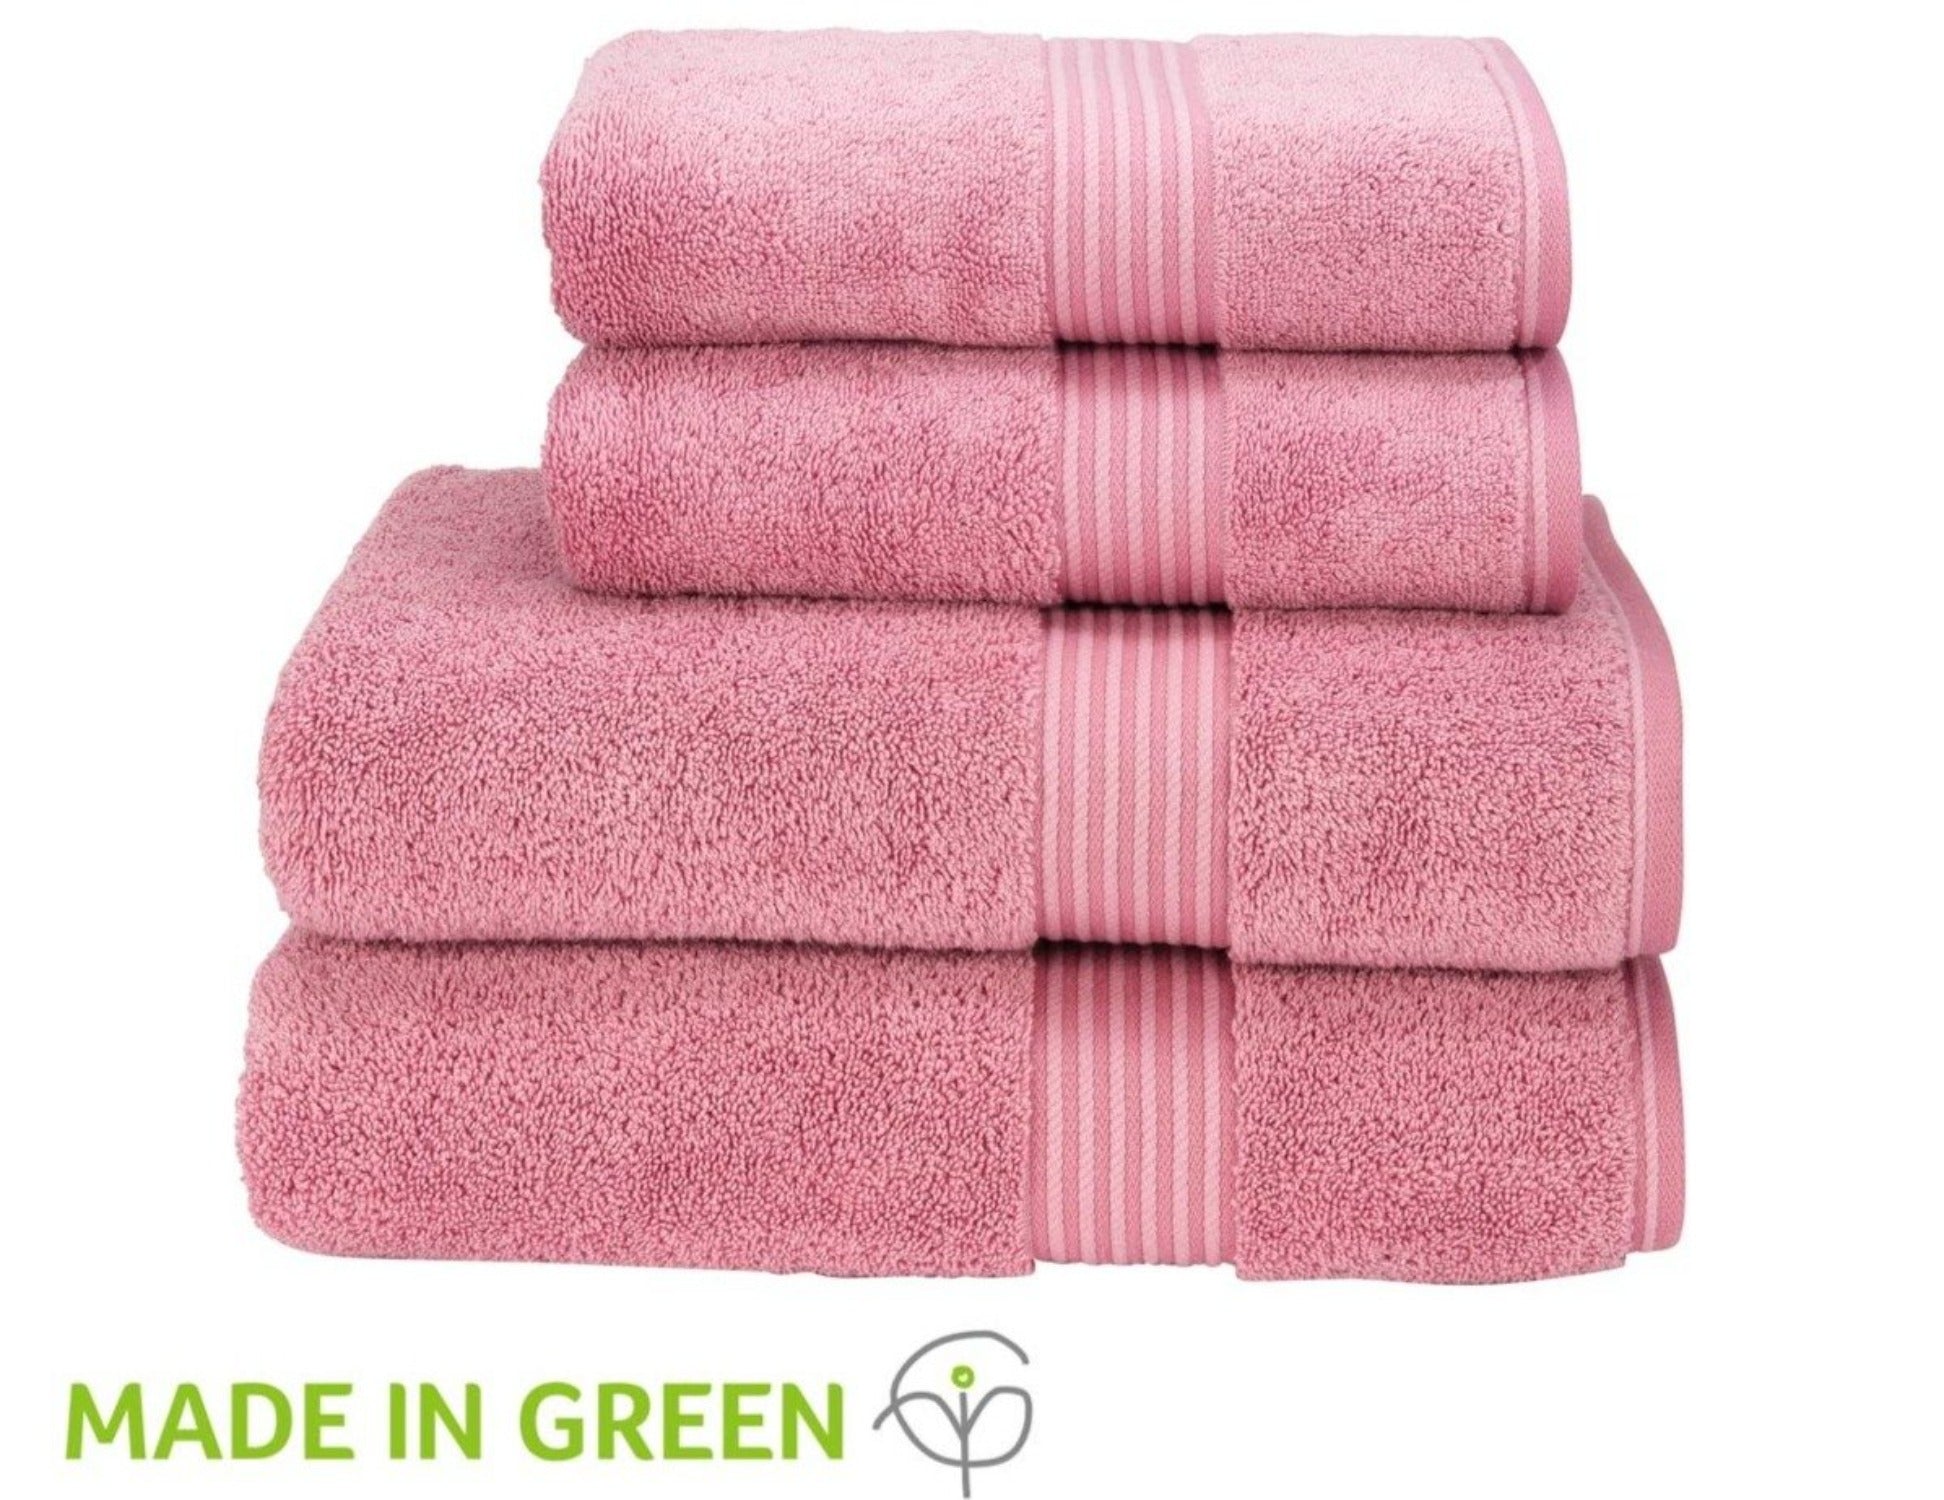 Christy Supreme Bath Towels & Mat Collection in Blush